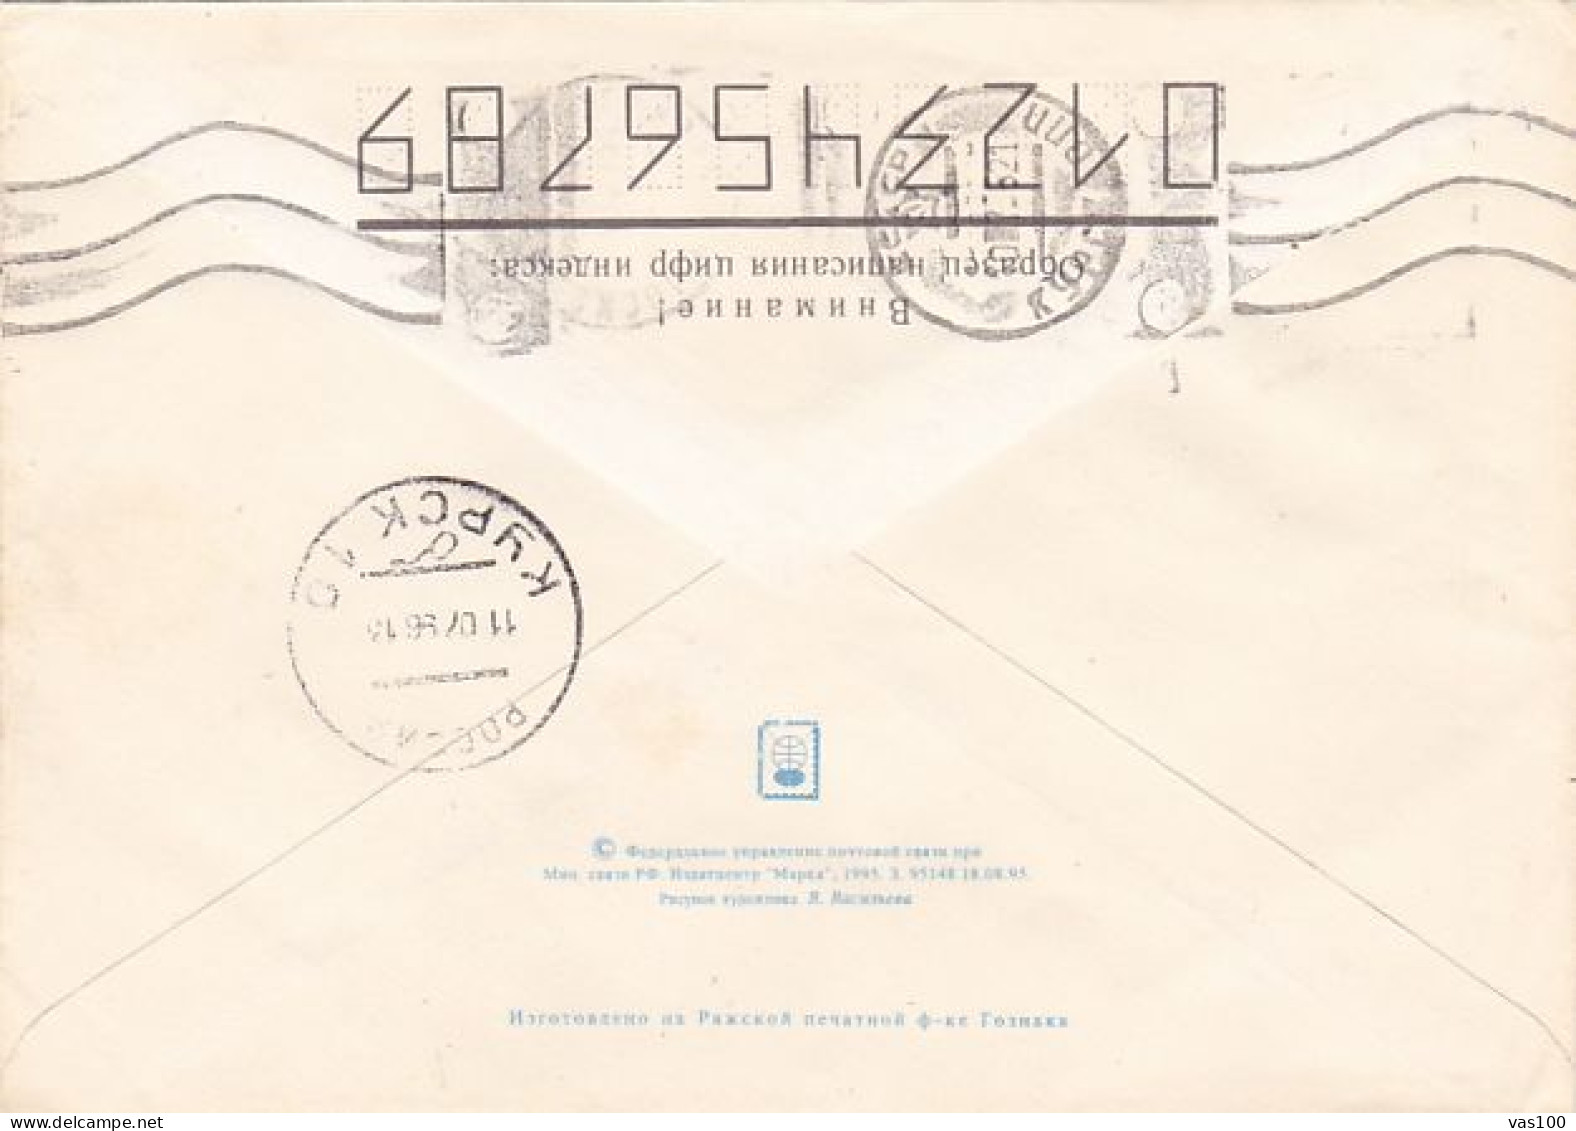 MOSCOW METROPOLITAN SUBWAY, STATION, COVER STATIONERY, ENTIER POSTAL, 1995, RUSSIA - Stamped Stationery